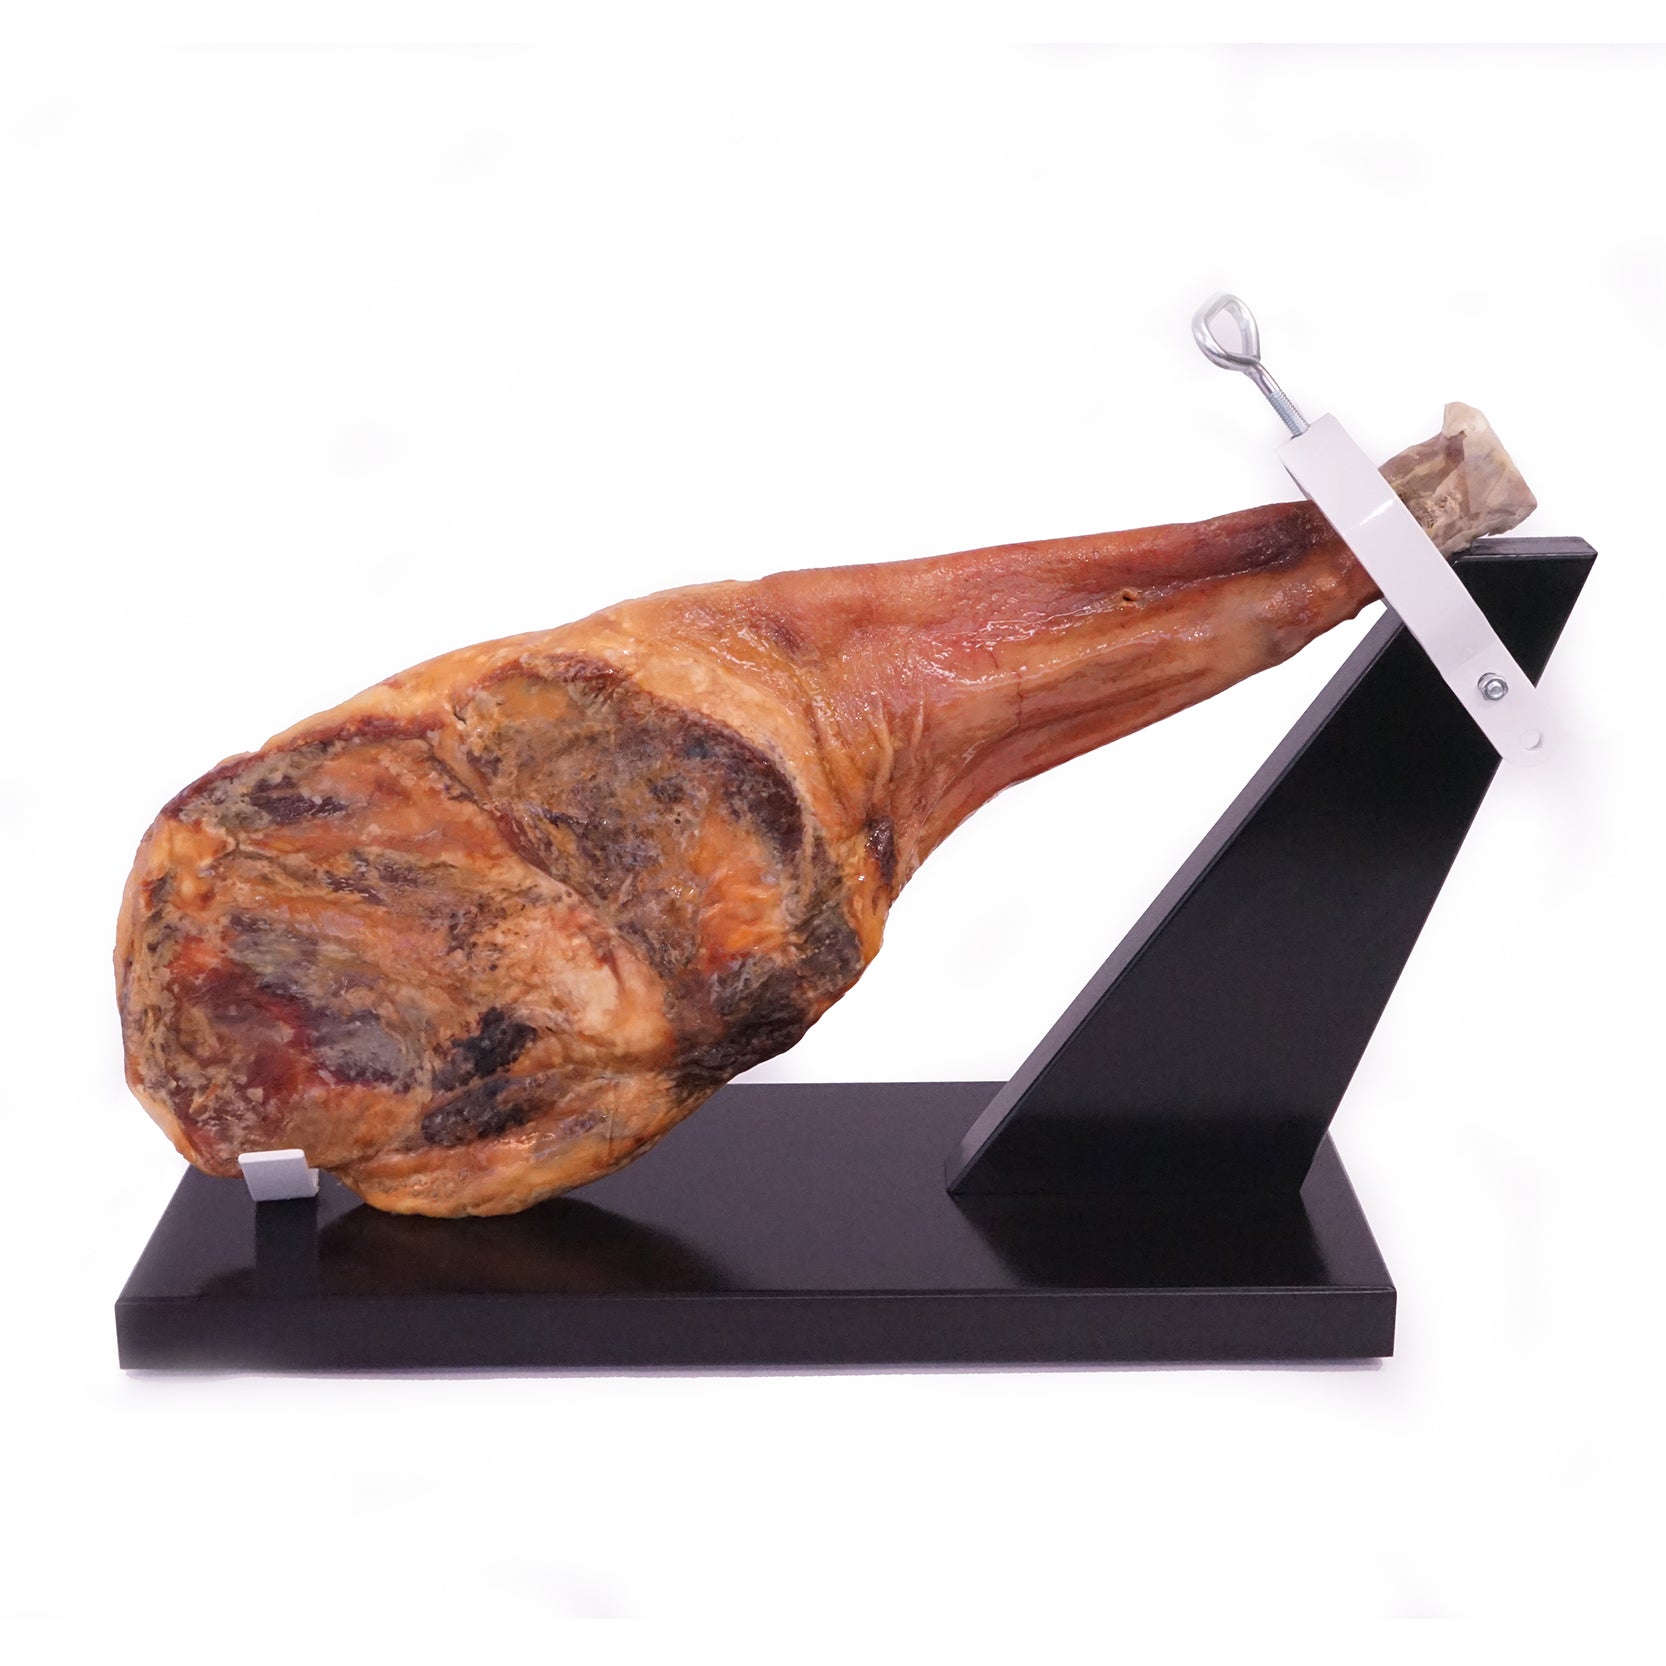 100% Iberico Shoulder Bone-In Grass Fed by Covap